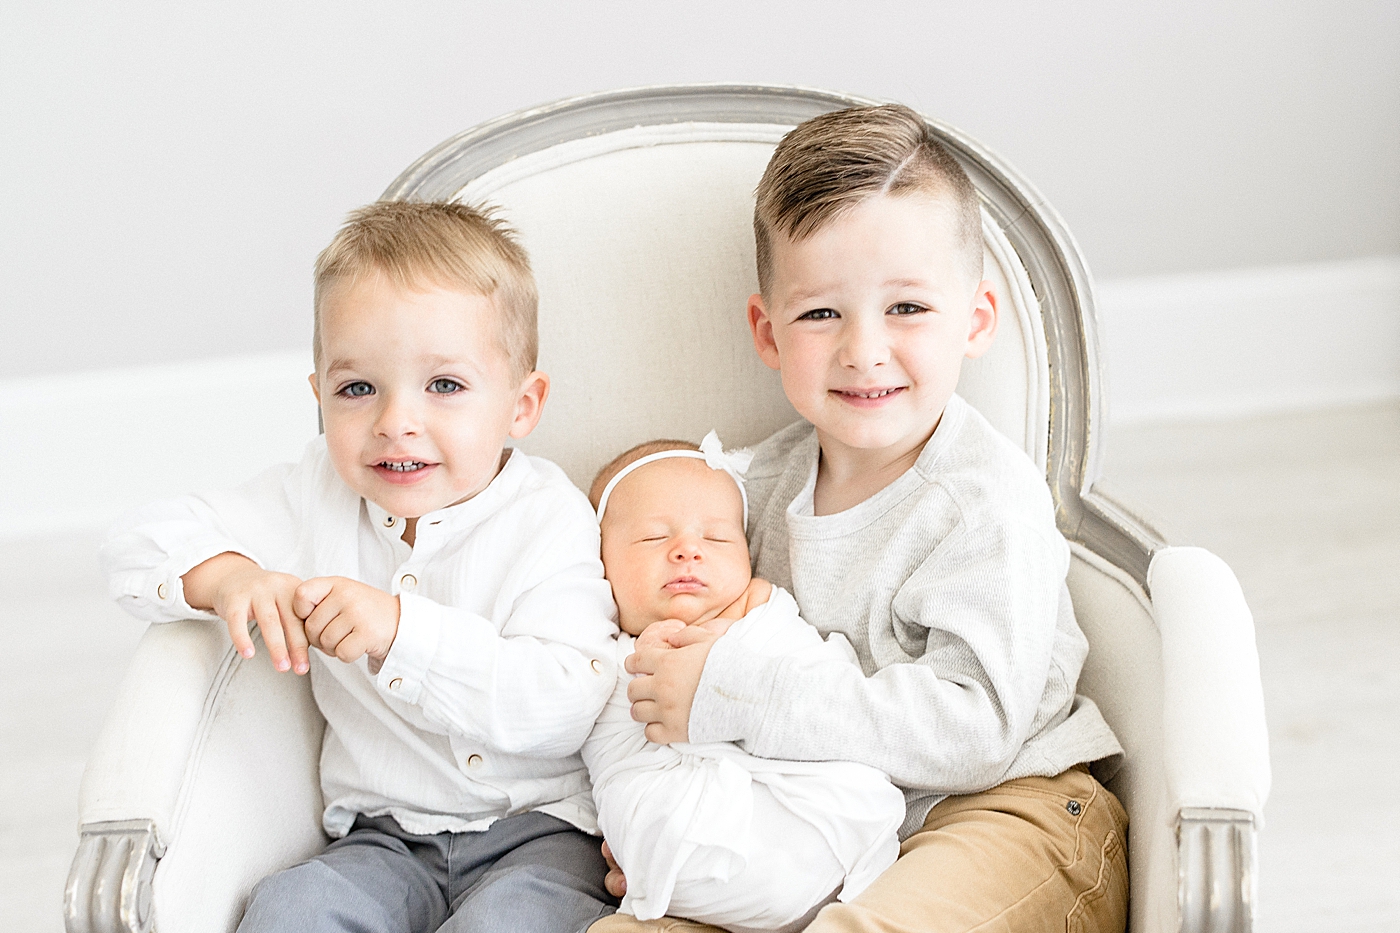 Sibling photo in chair during baby girl's newborn session in the studio. Photo by Brittany Elise Photography.